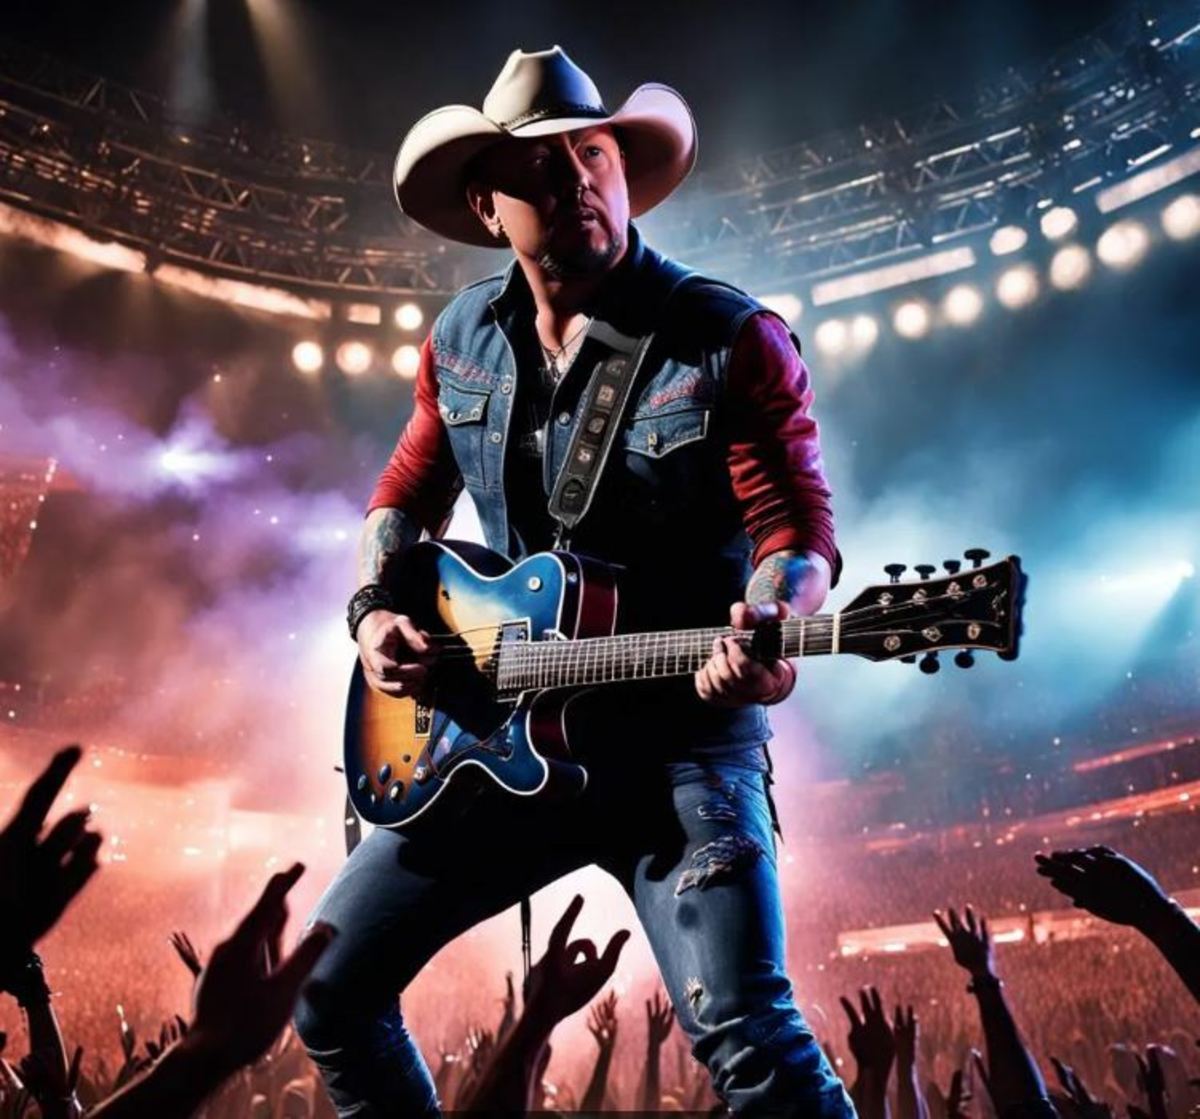 Jason Aldean: The Popular and Controversial Country Music Maestro